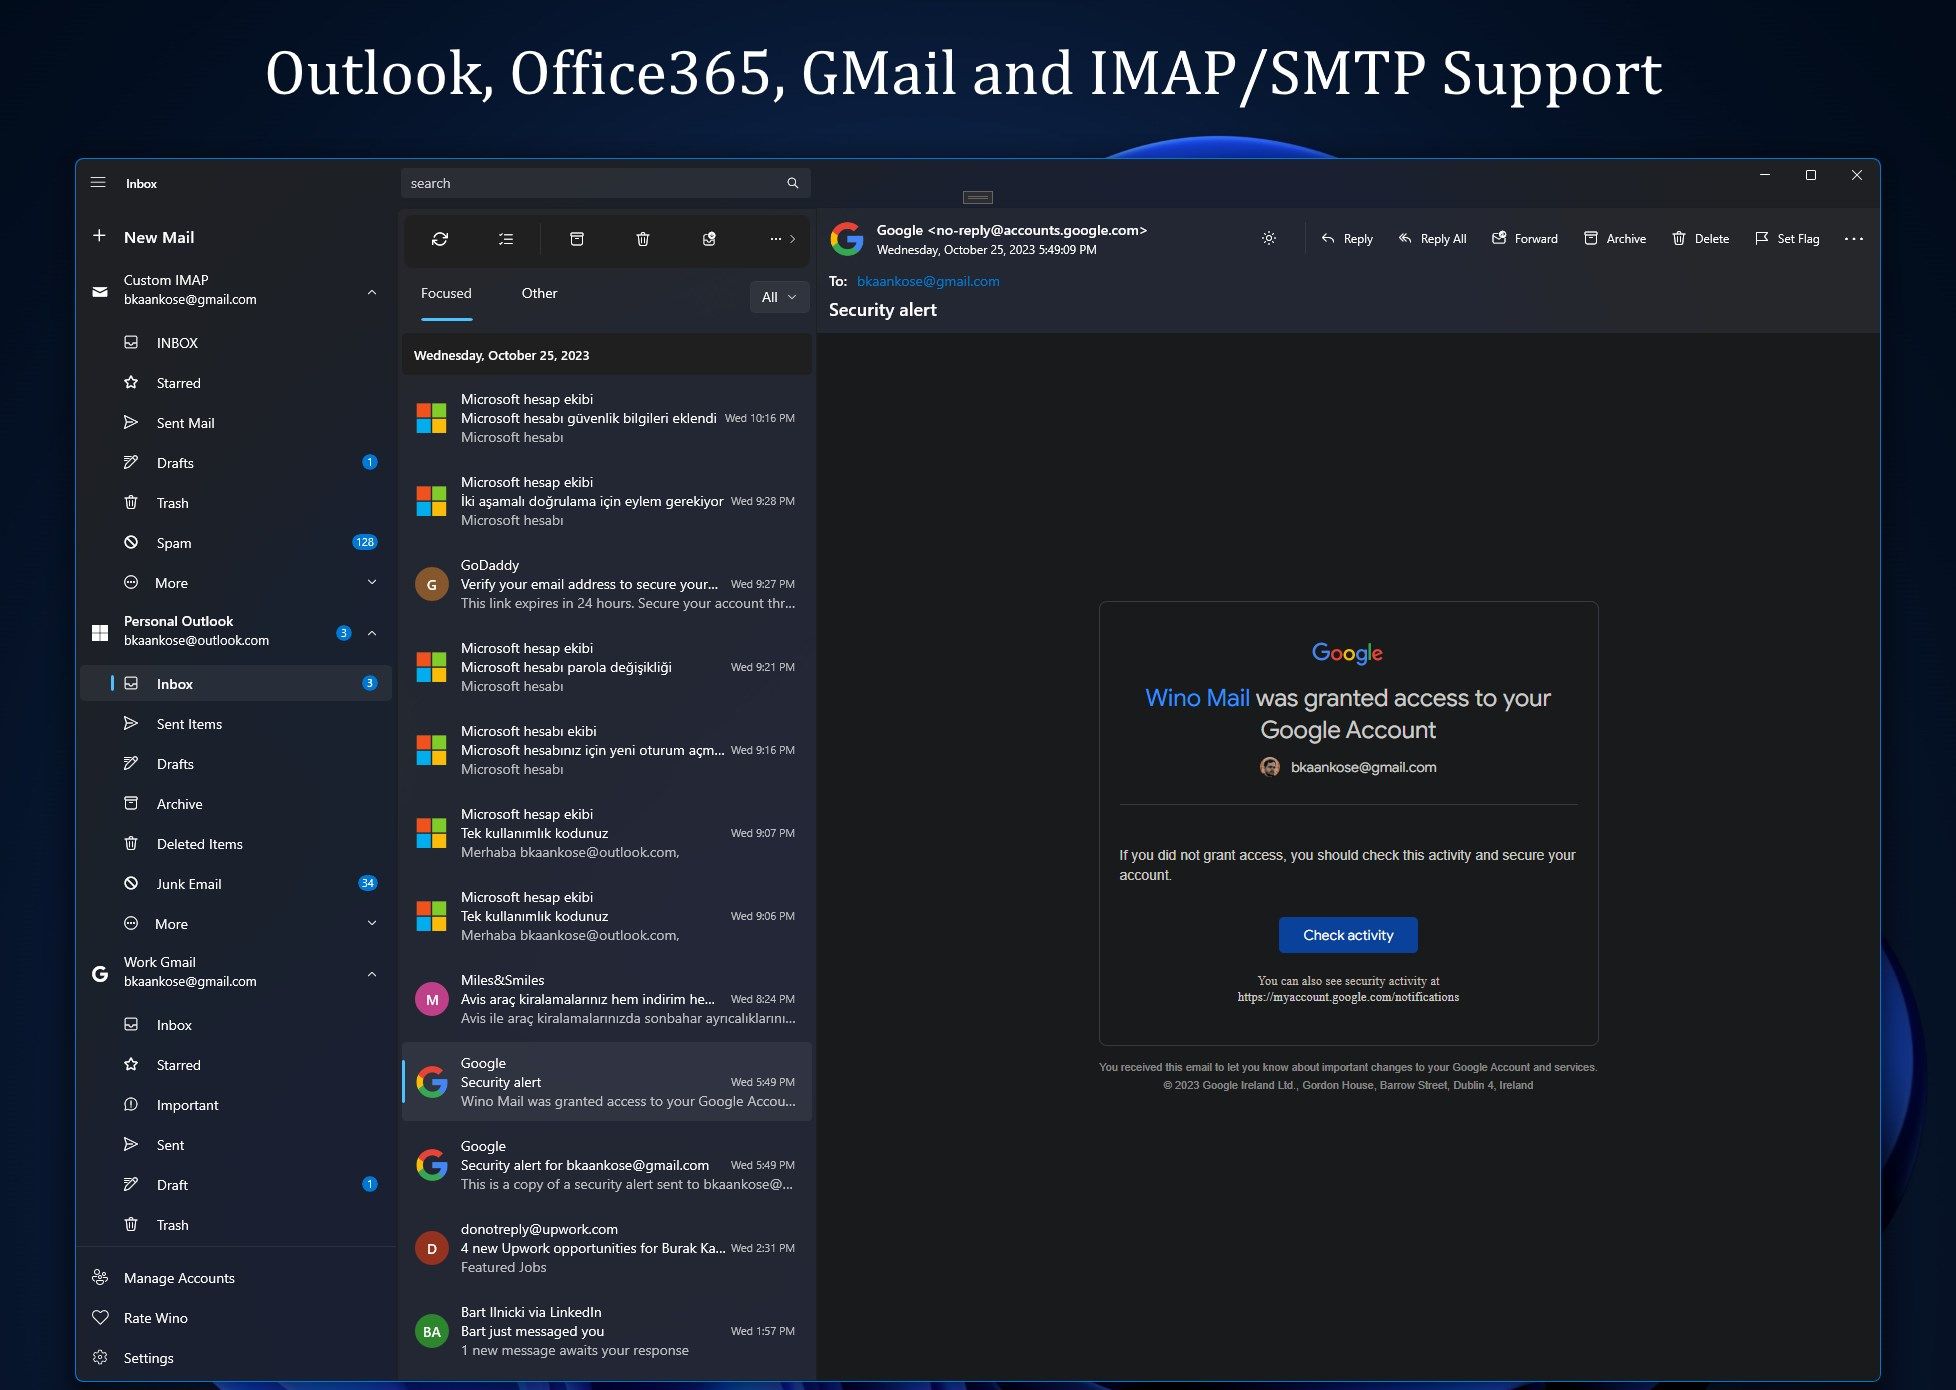 Supports Microsoft Live (MSN, Outlook, Hotmail, Live), Gmail and all IMAP servers.